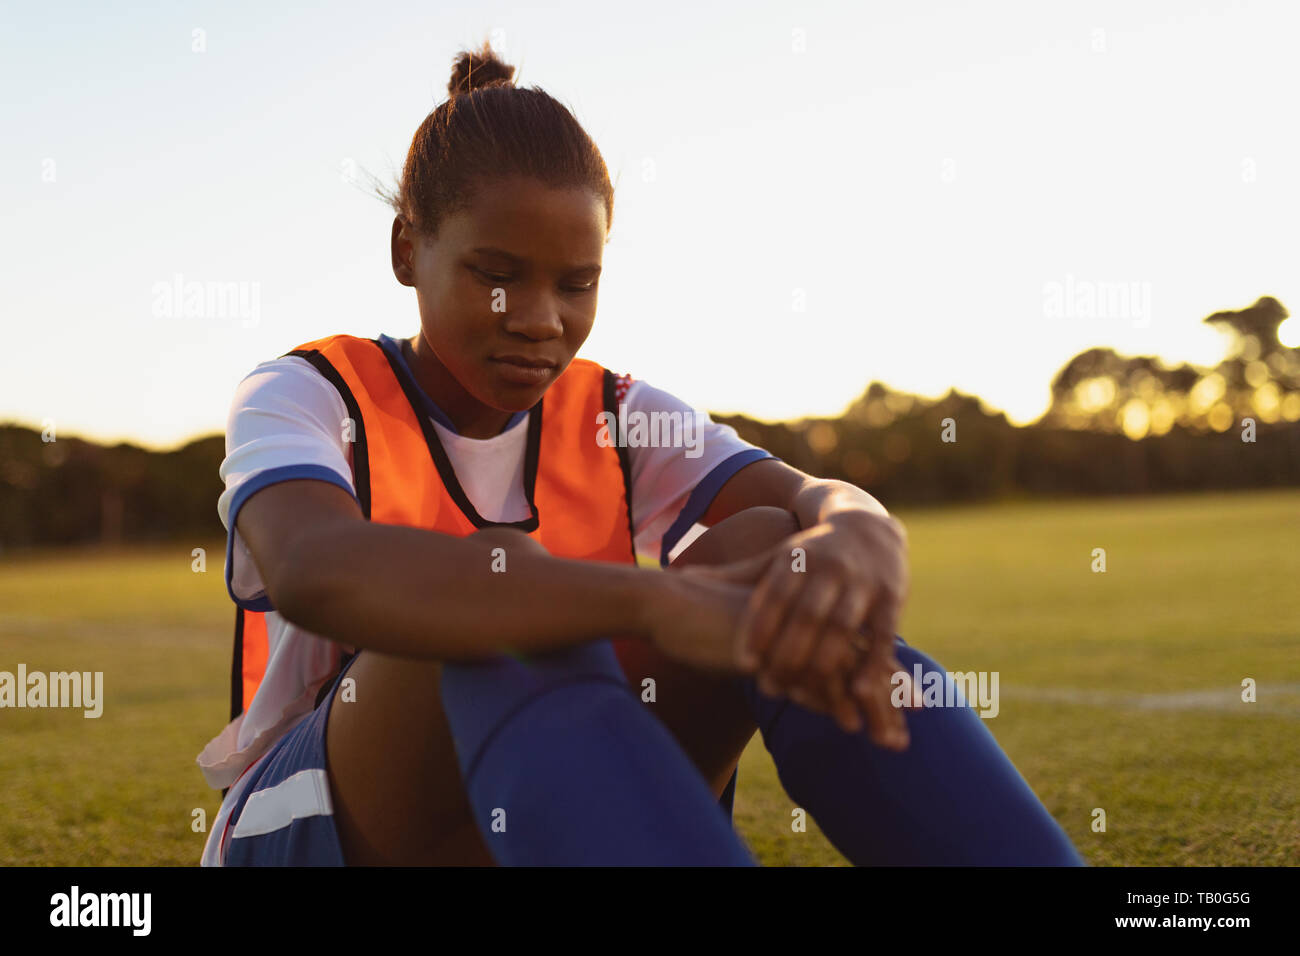 Soccer player relaxing on grass Stock Photo